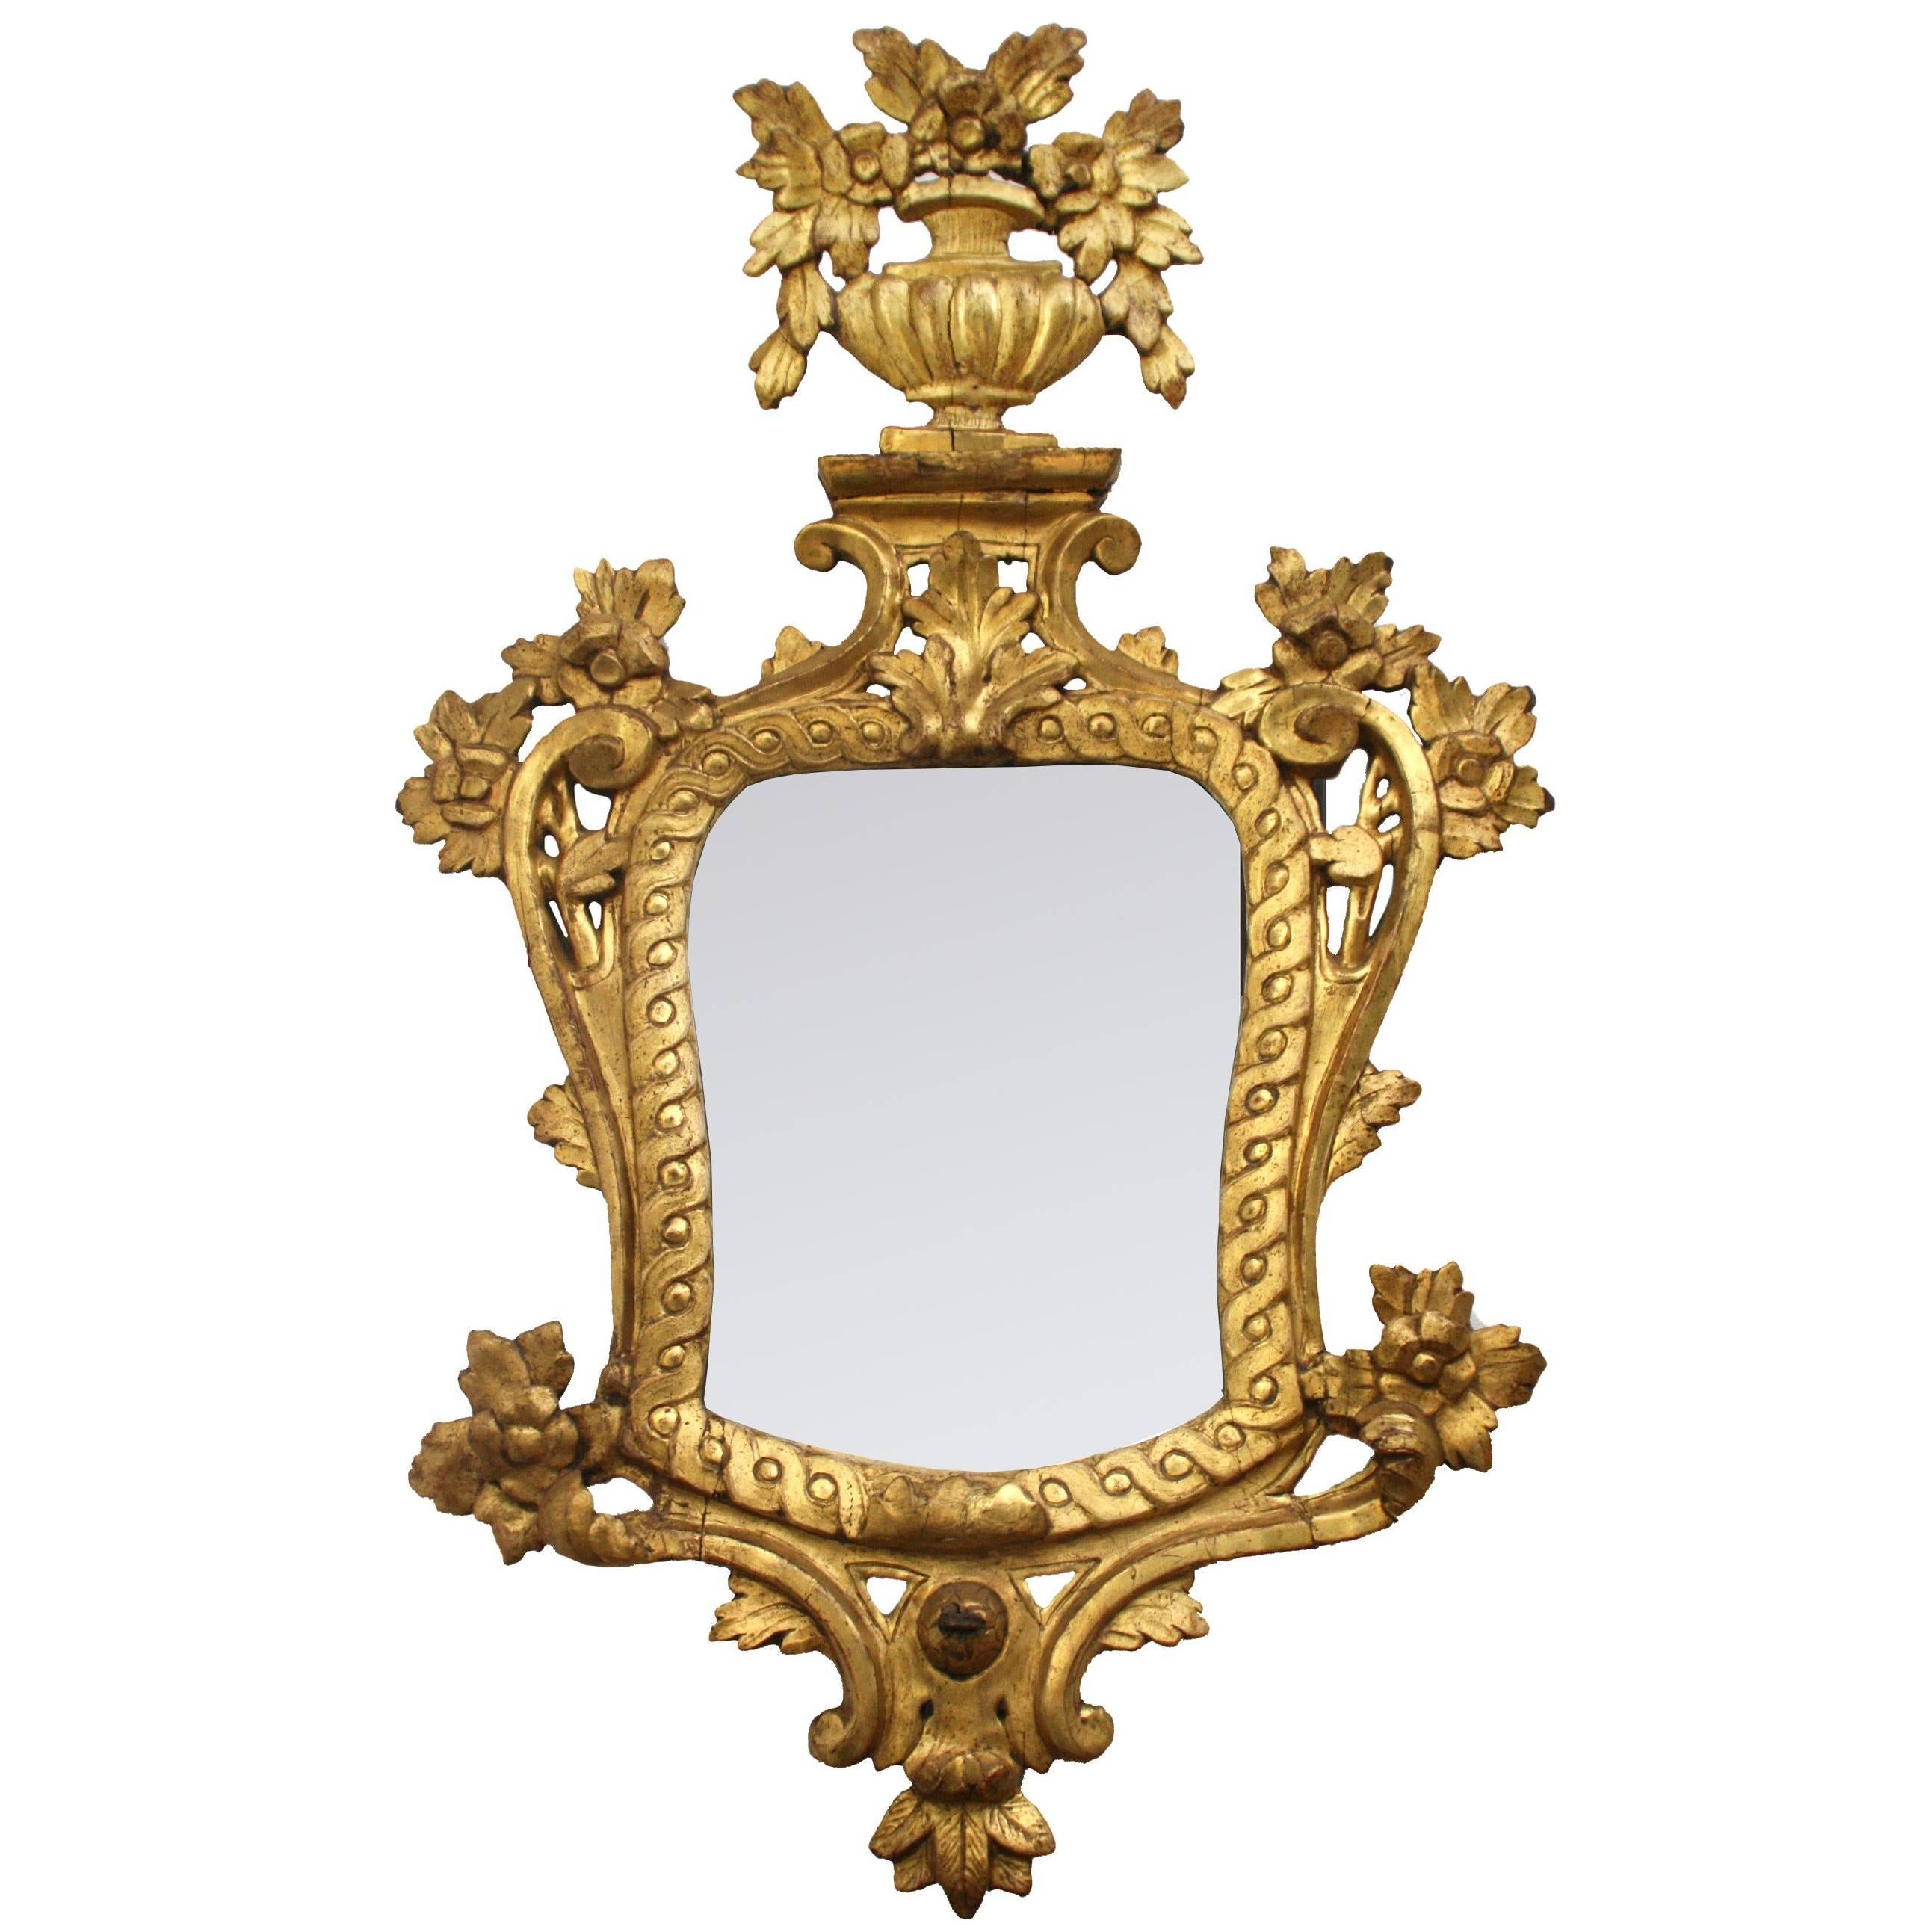 Spanish, 18th Century Charles IV of Spain Gold Gilded Neoclassical Mirror